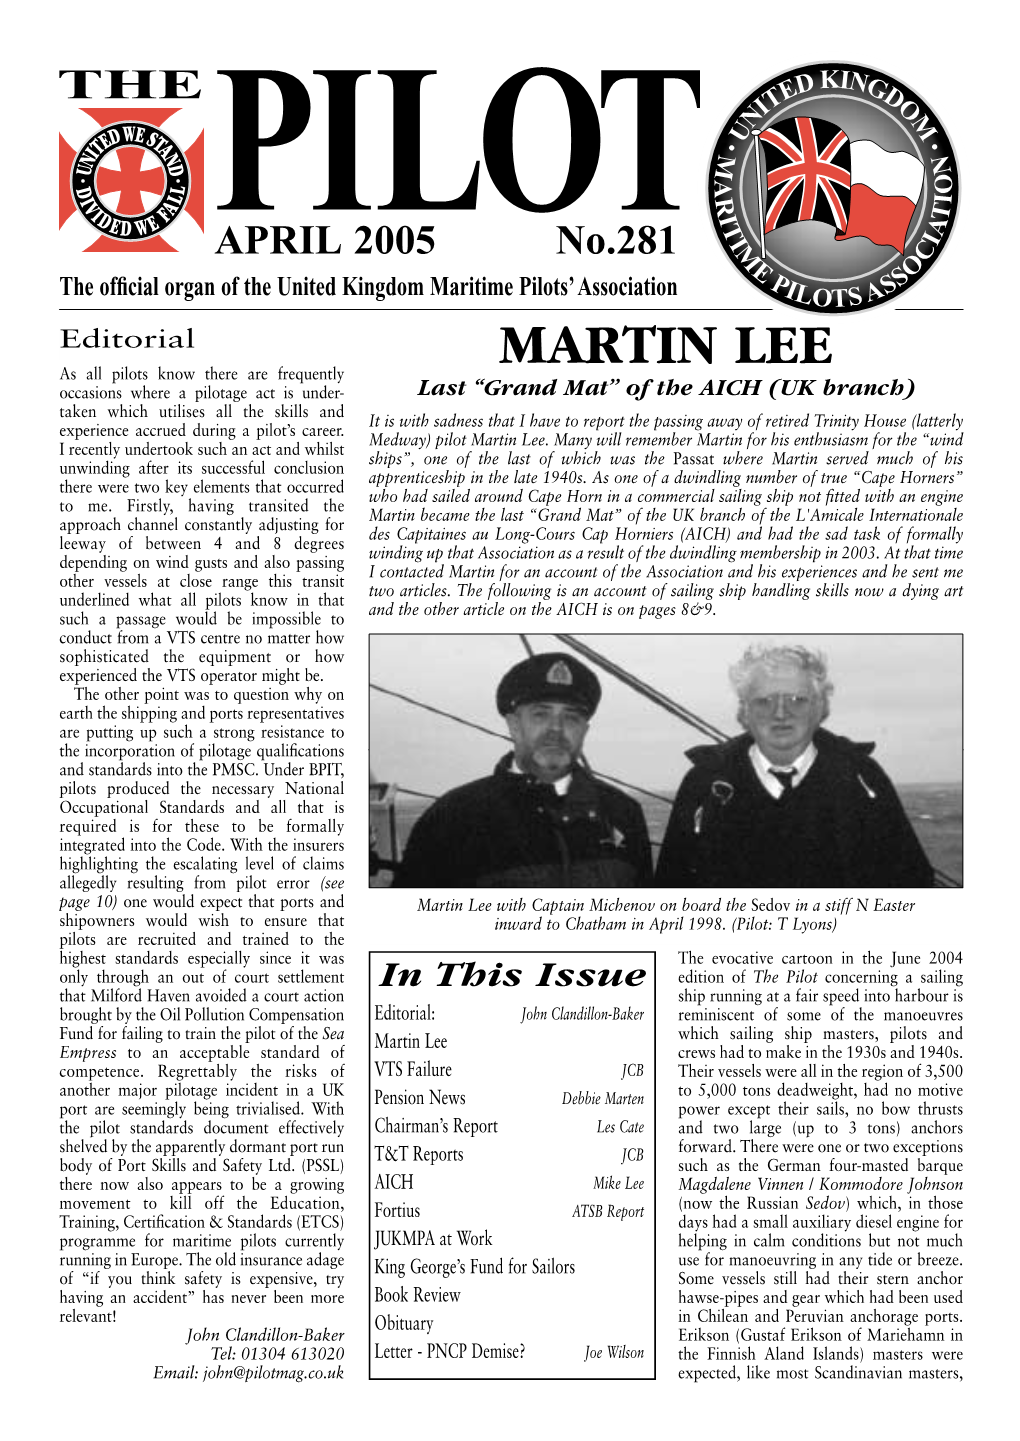 Pilotmag.Co.Uk Expected, Like Most Scandinavian Masters, April 2005 2 the Pilot